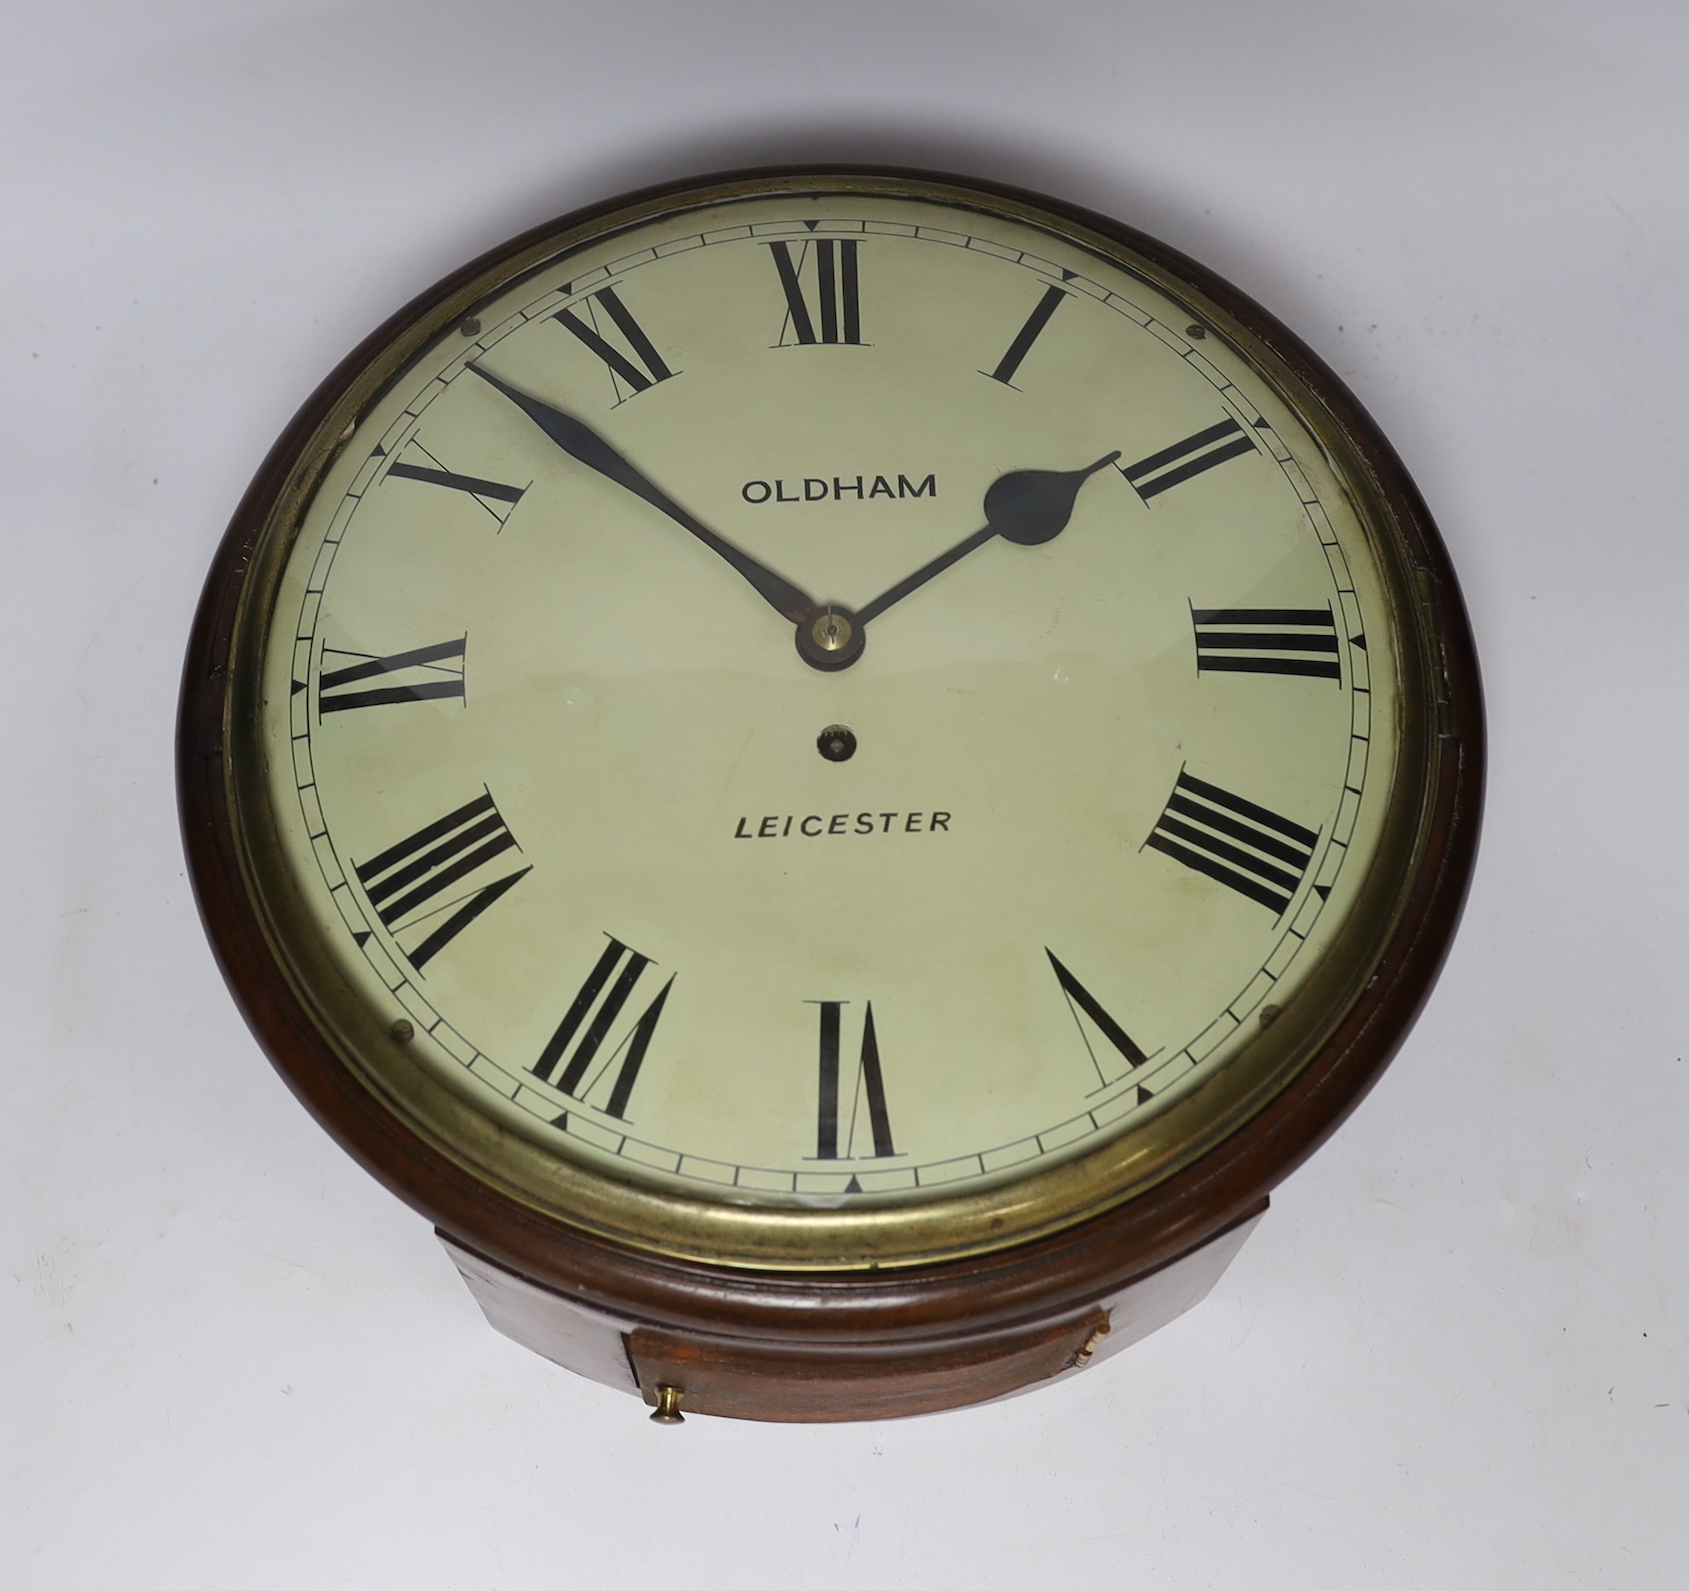 A mid 19th century mahogany dial clock, inscribed ‘Oldham, Leicester’, with key and pendulum, 36cm